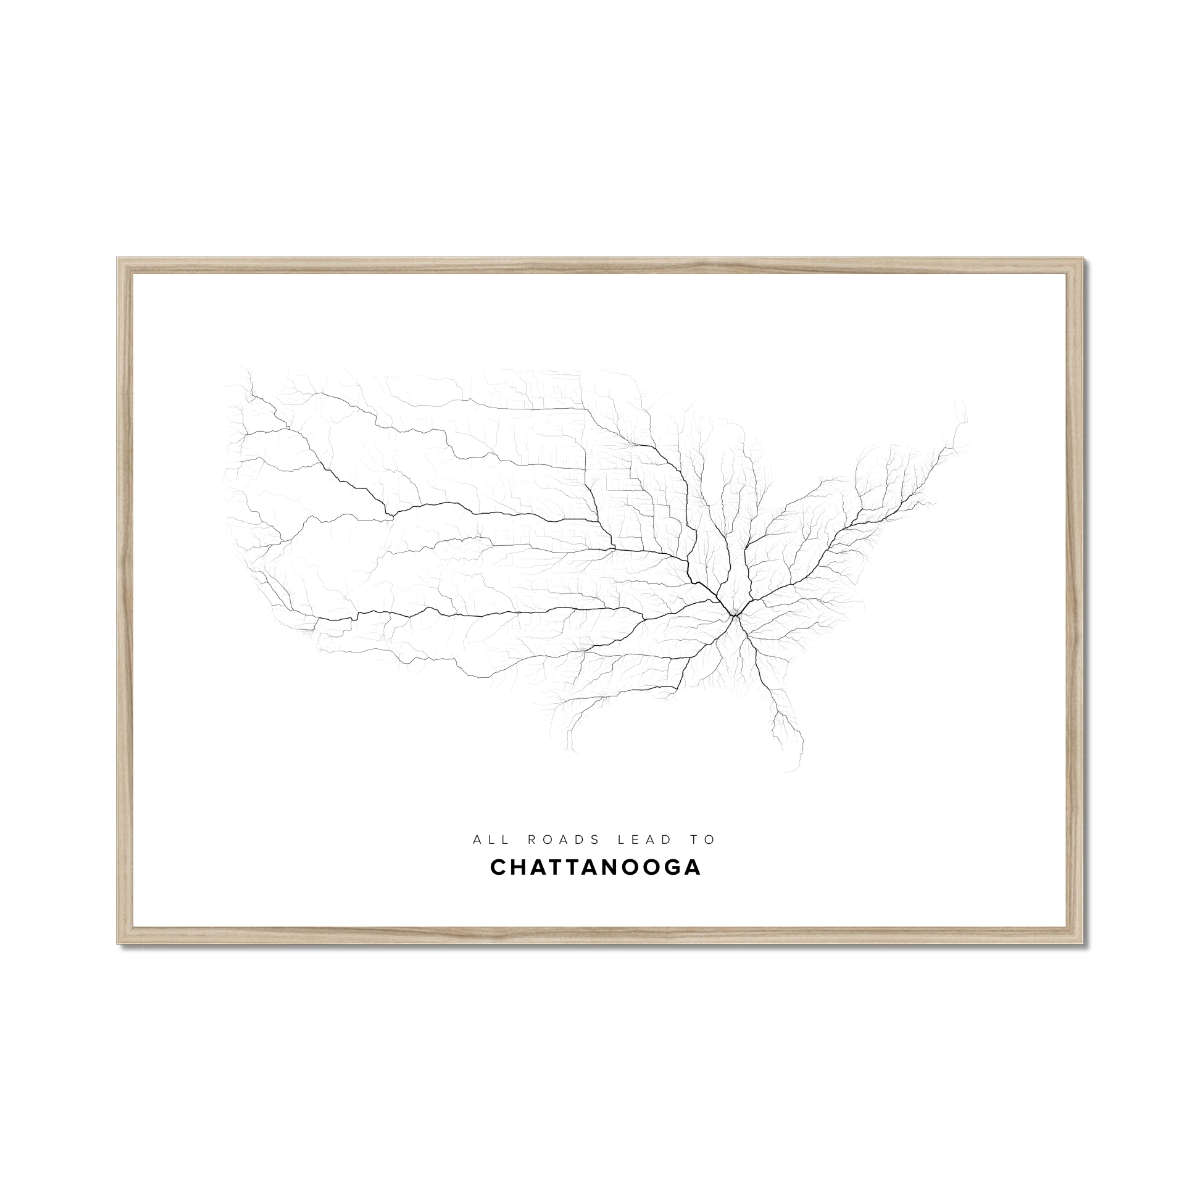 All roads lead to Chattanooga (United States of America) Fine Art Map Print